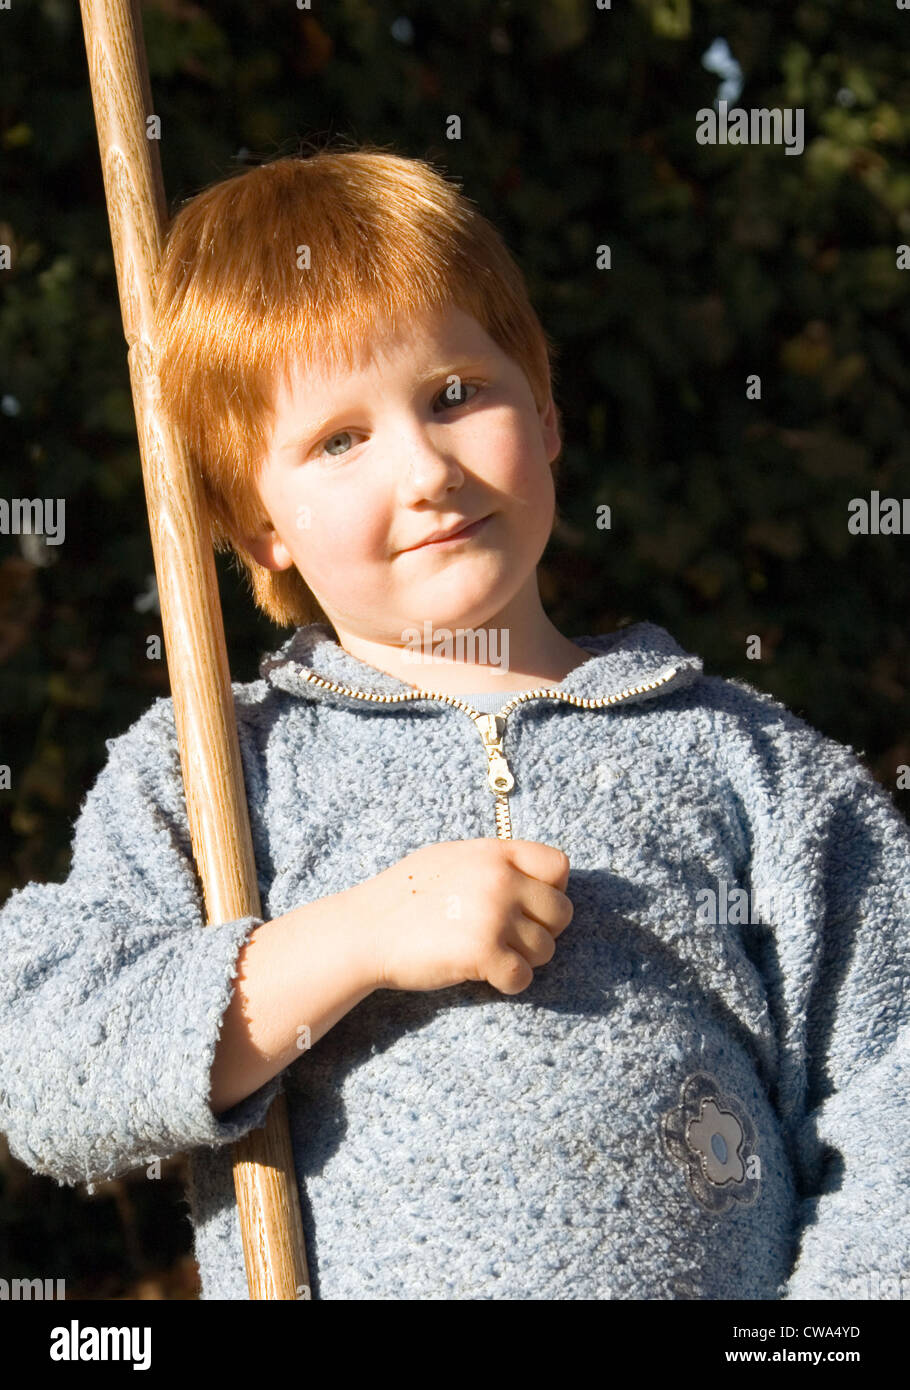 Portrait of a red-haired child Stock Photo